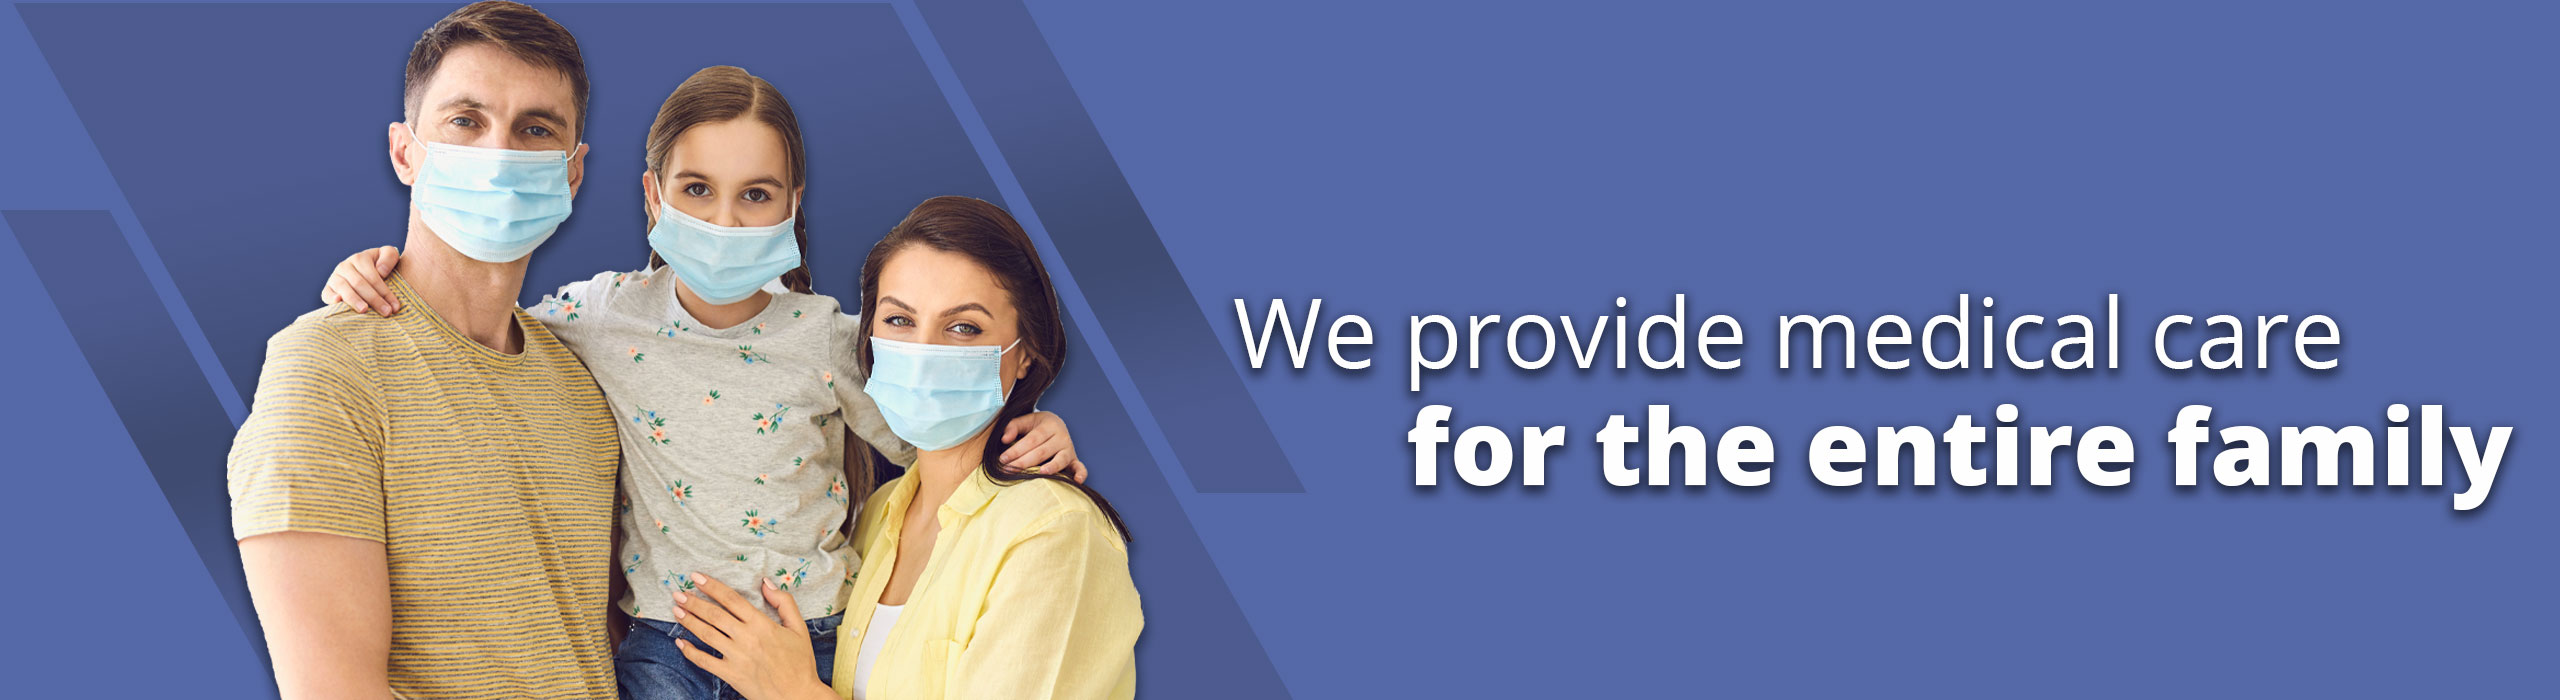 We provide medical care for the entire family